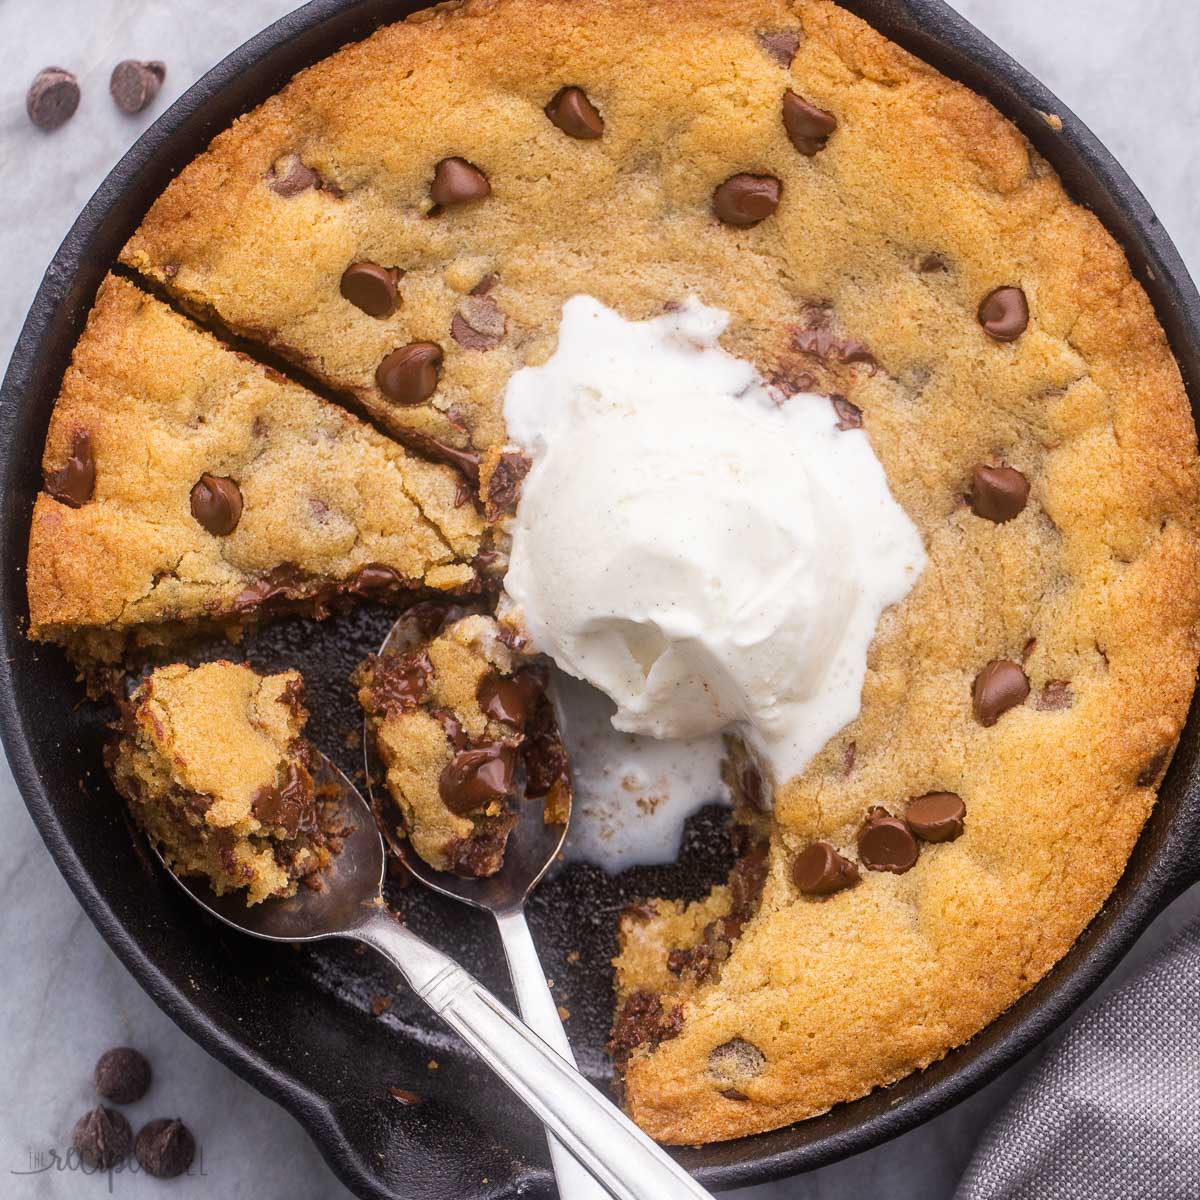 https://www.thereciperebel.com/wp-content/uploads/2023/04/skillet-cookie-TRR-1200-30-of-33.jpg